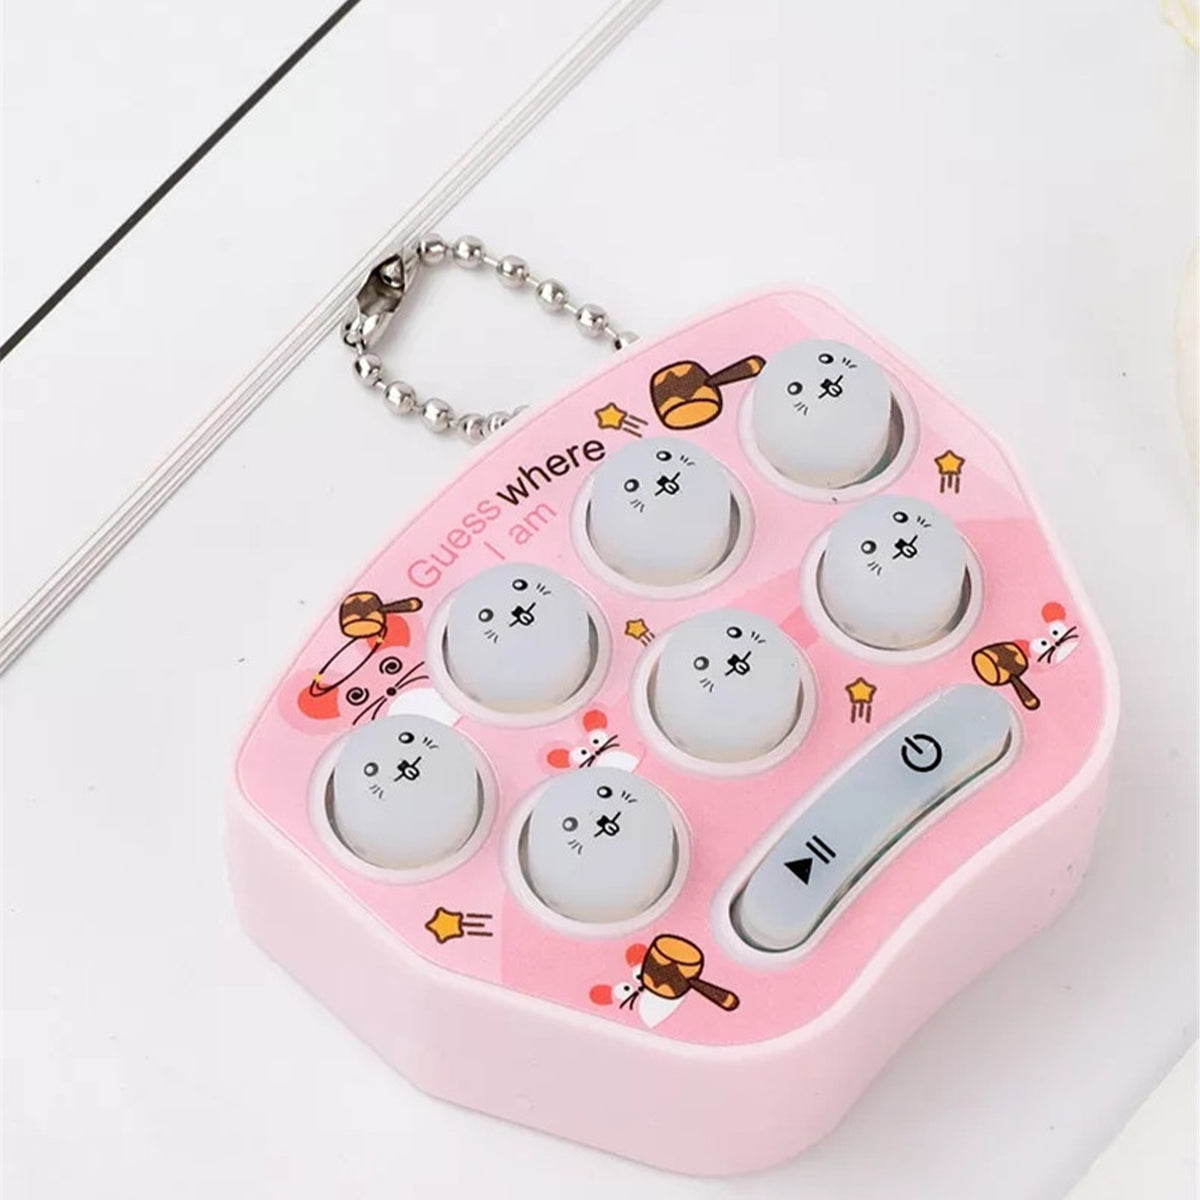 Whack-a-Mole Hamster Game Keychain